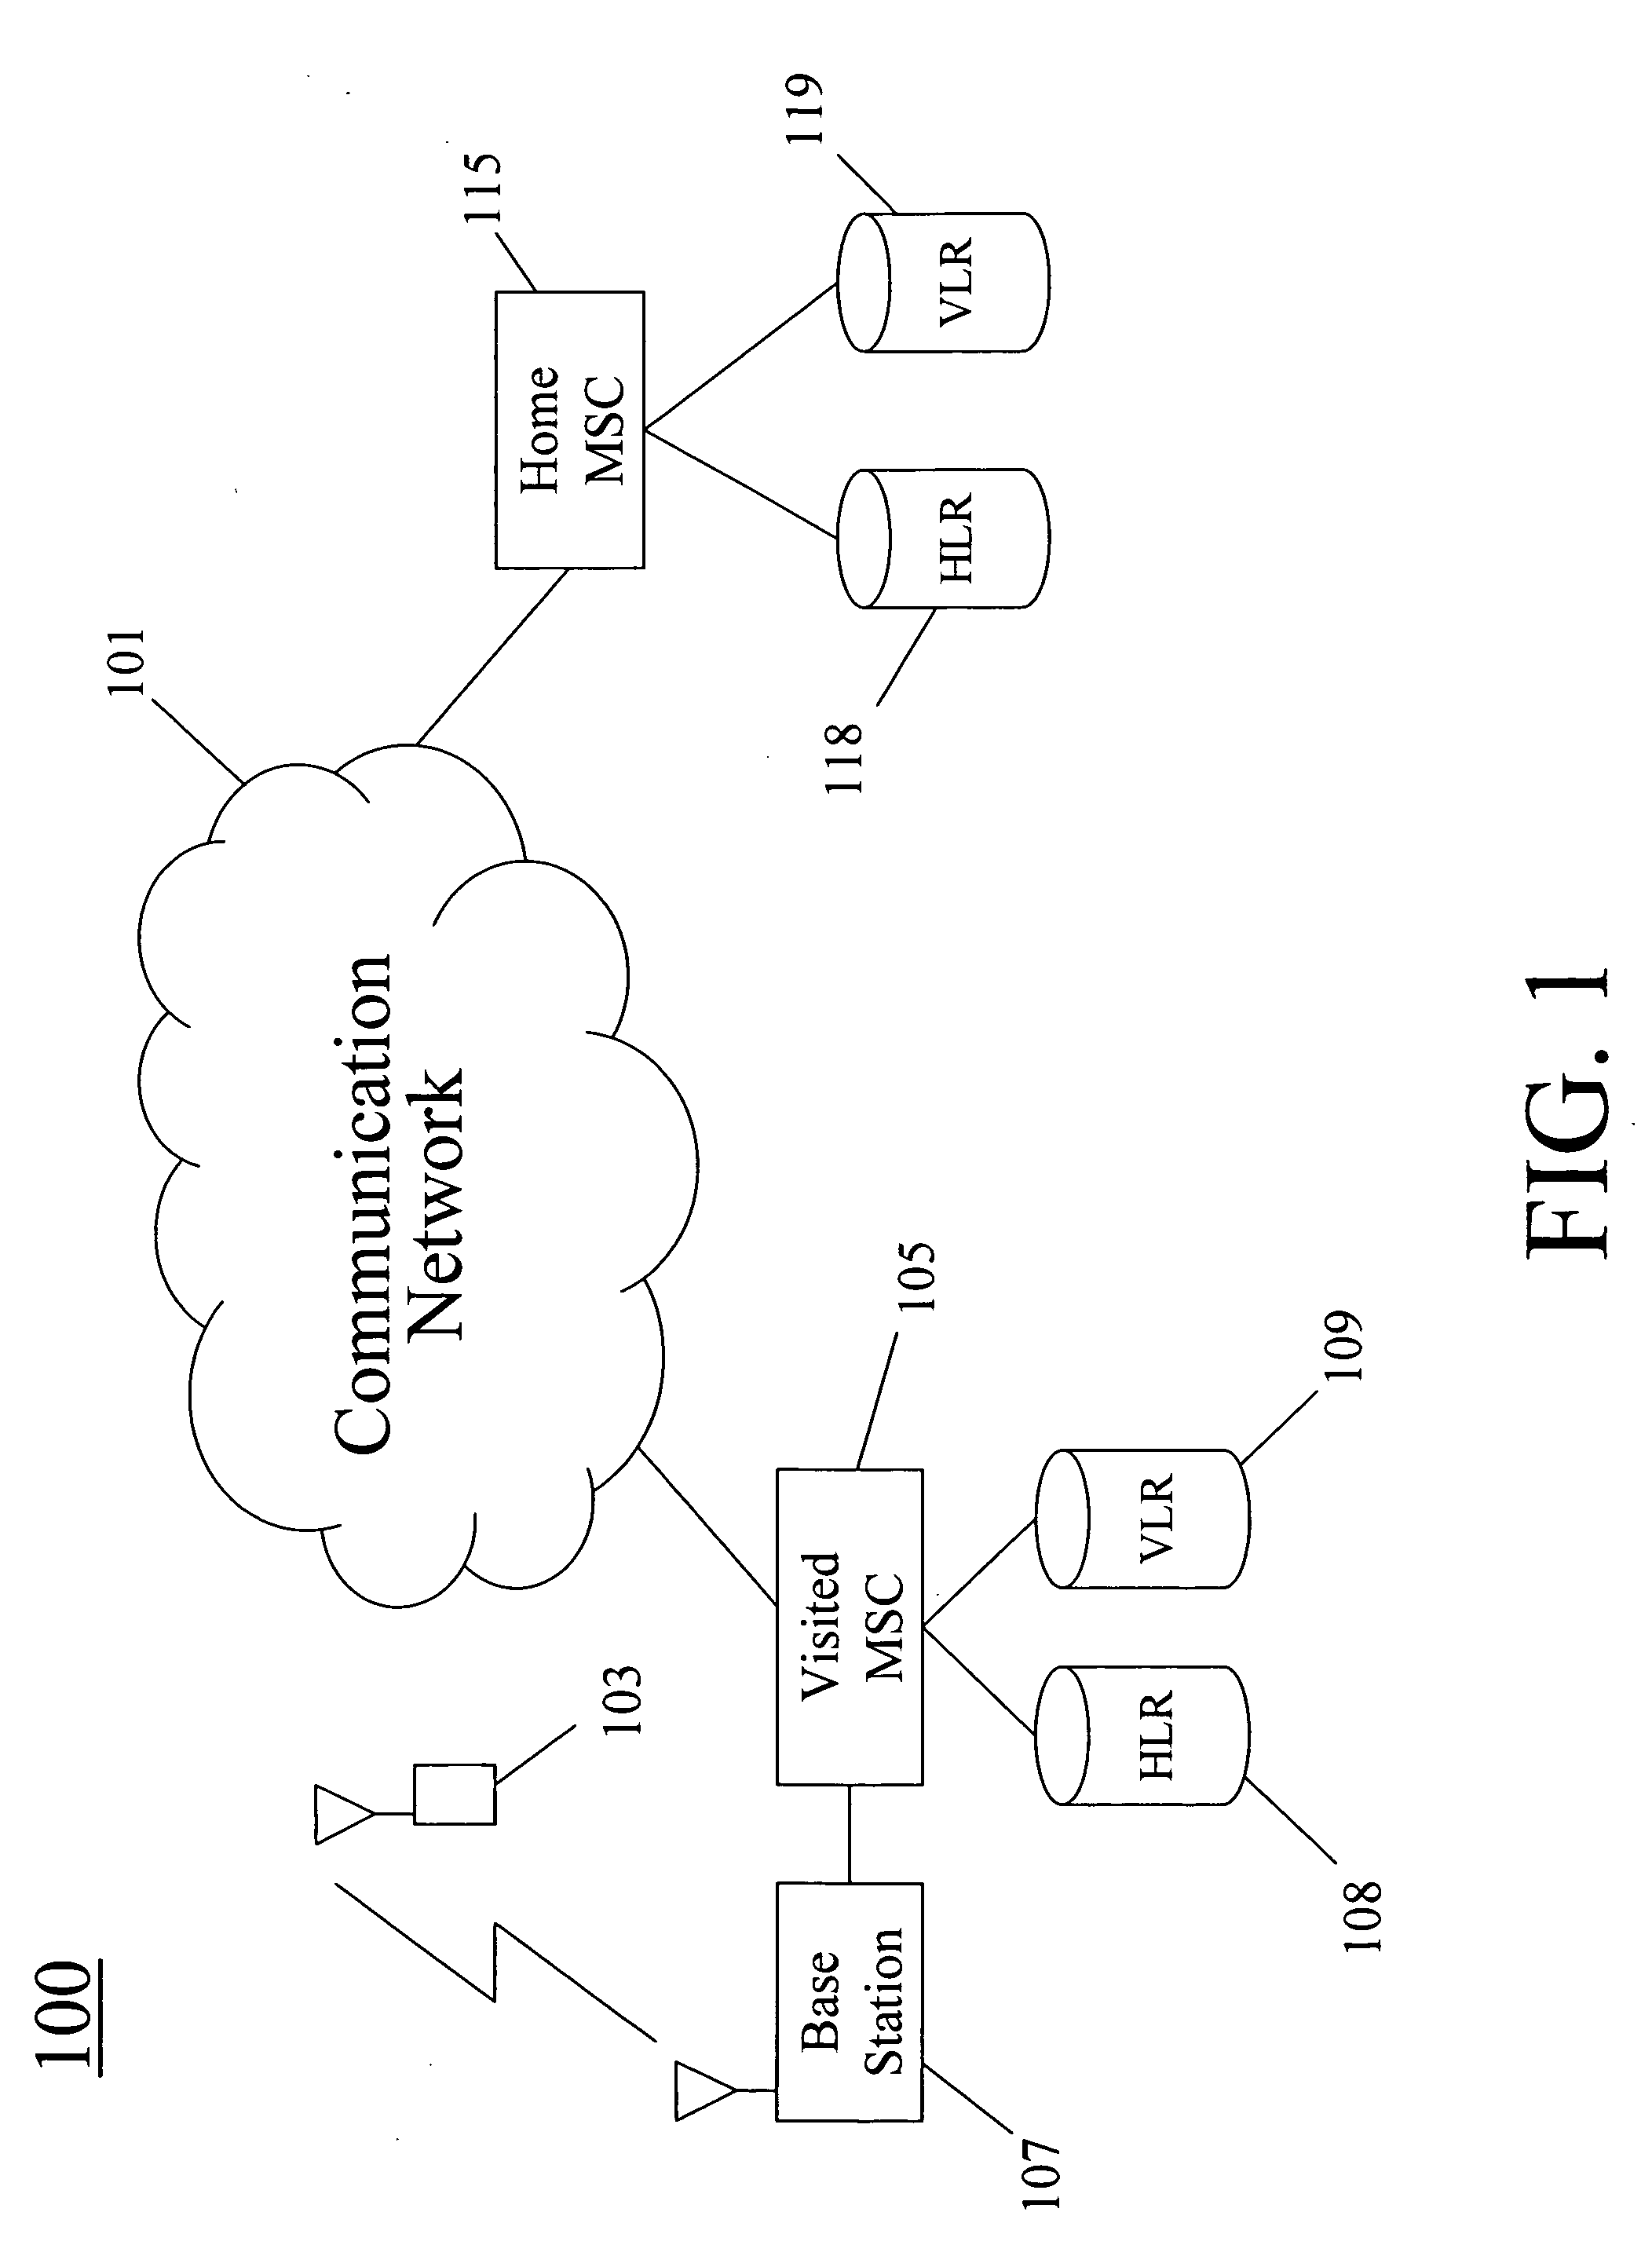 Method for assigning an emergency temporary directory number to a roaming mobile unit